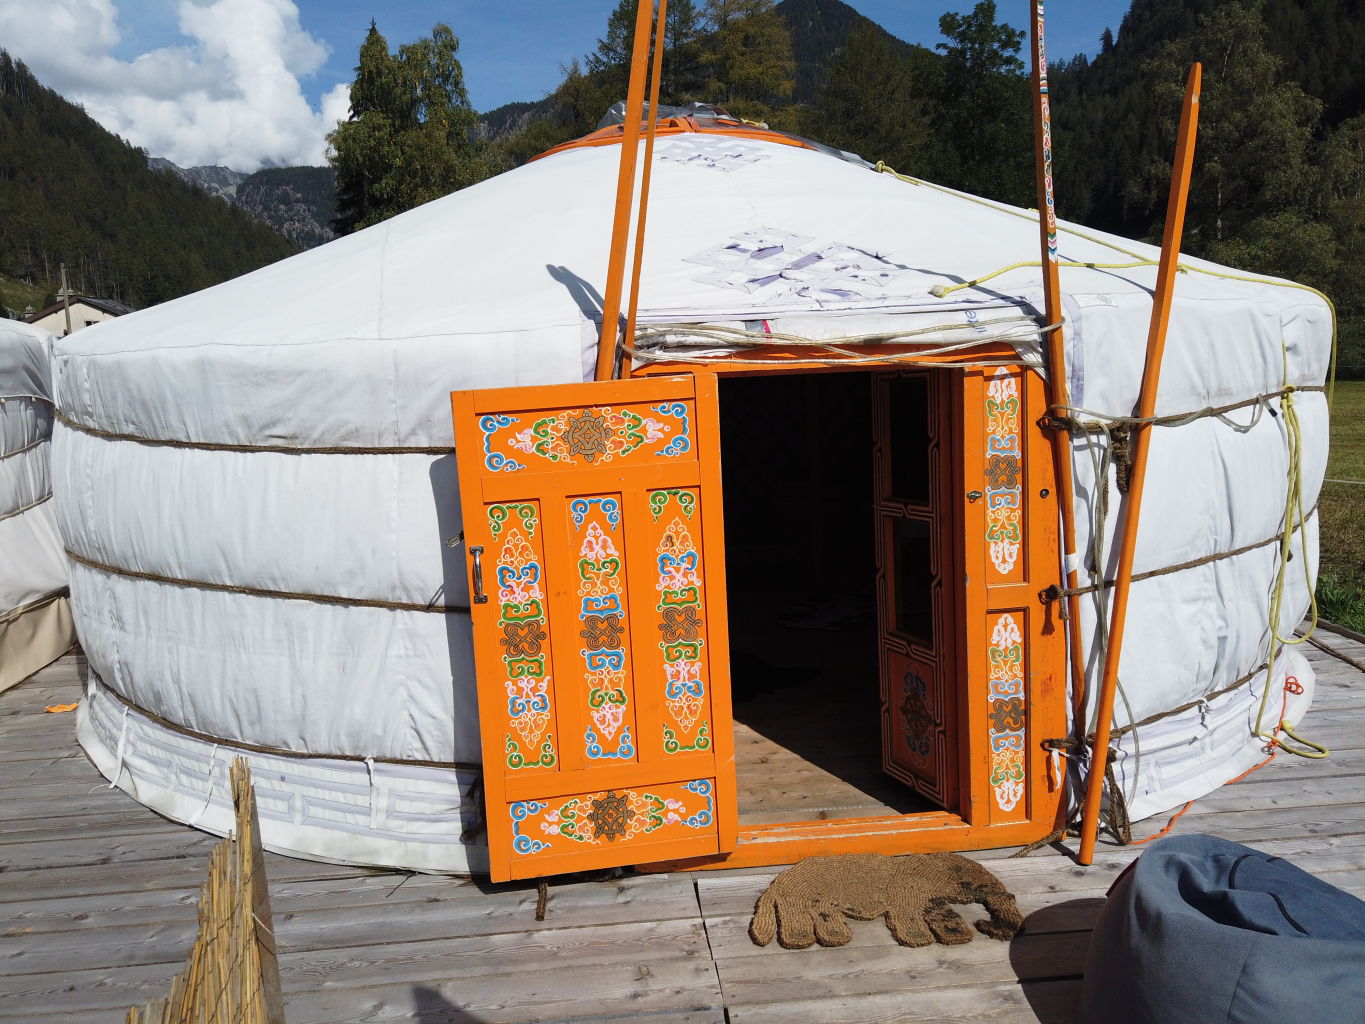 In Trient there is a yurt where you can sleep for an unforgettable stay. Valais. Switzerland